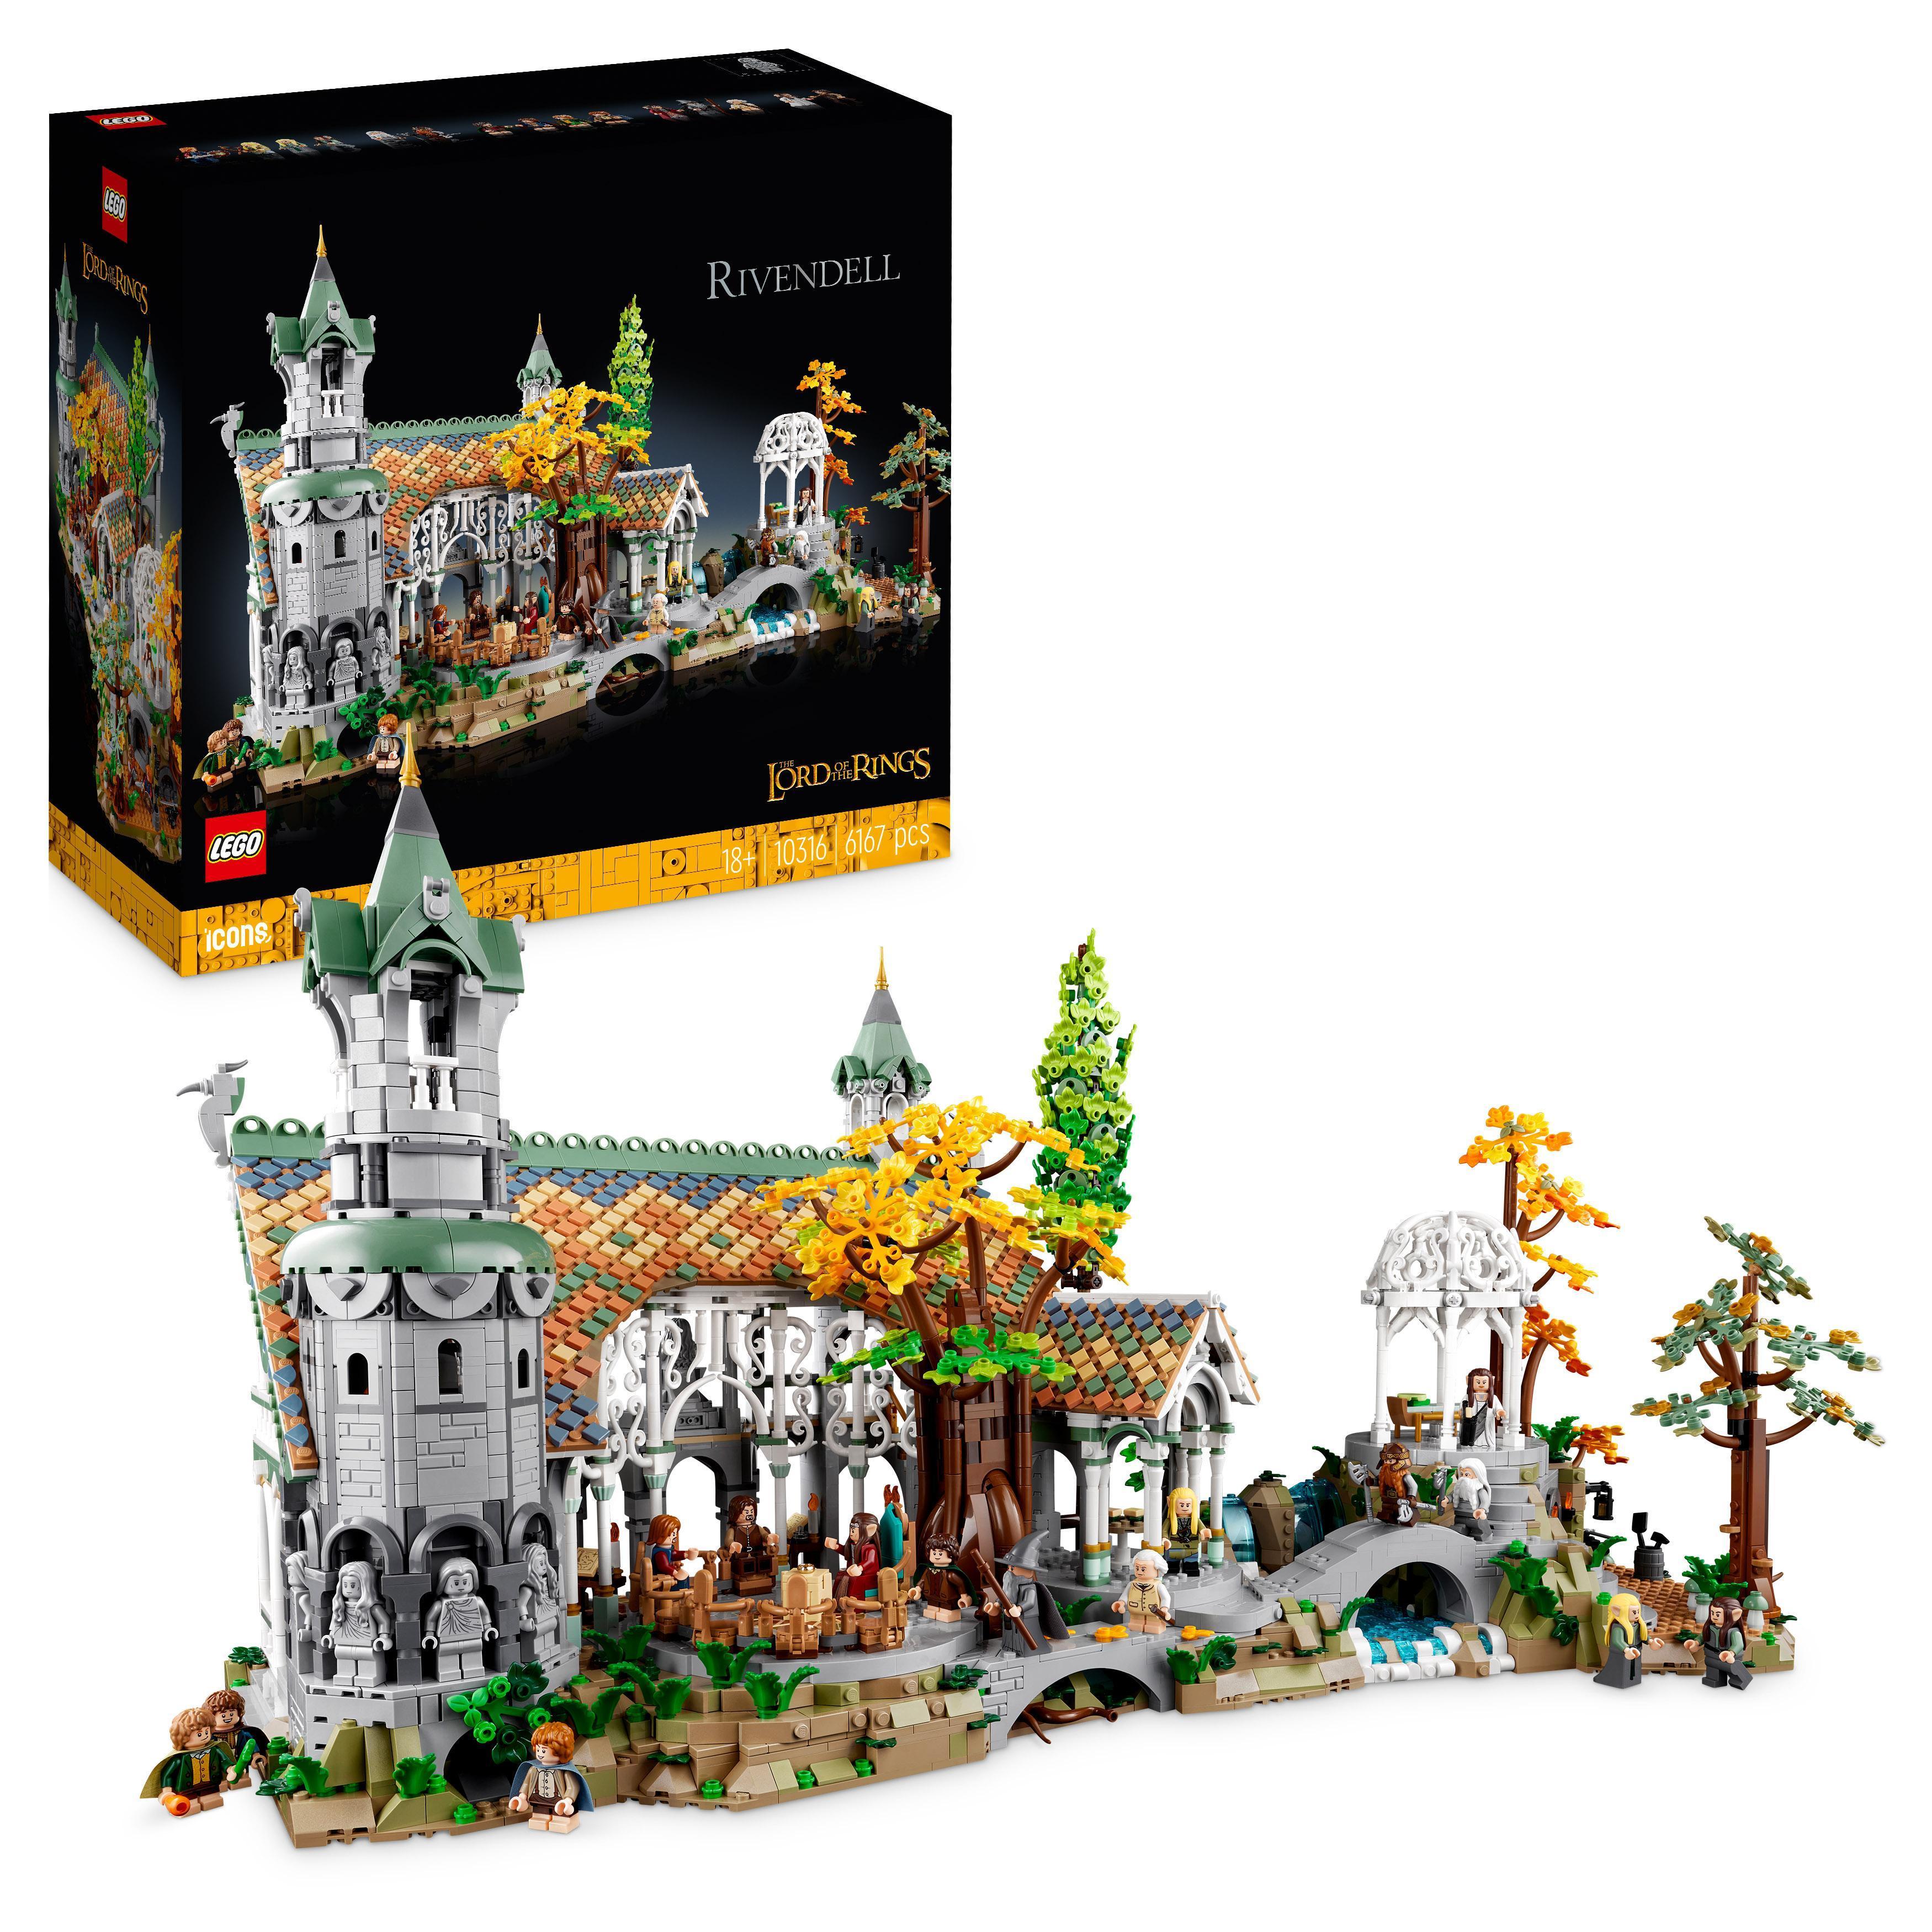 Buy LEGO Lord of the Rings - Rivendell (10316)